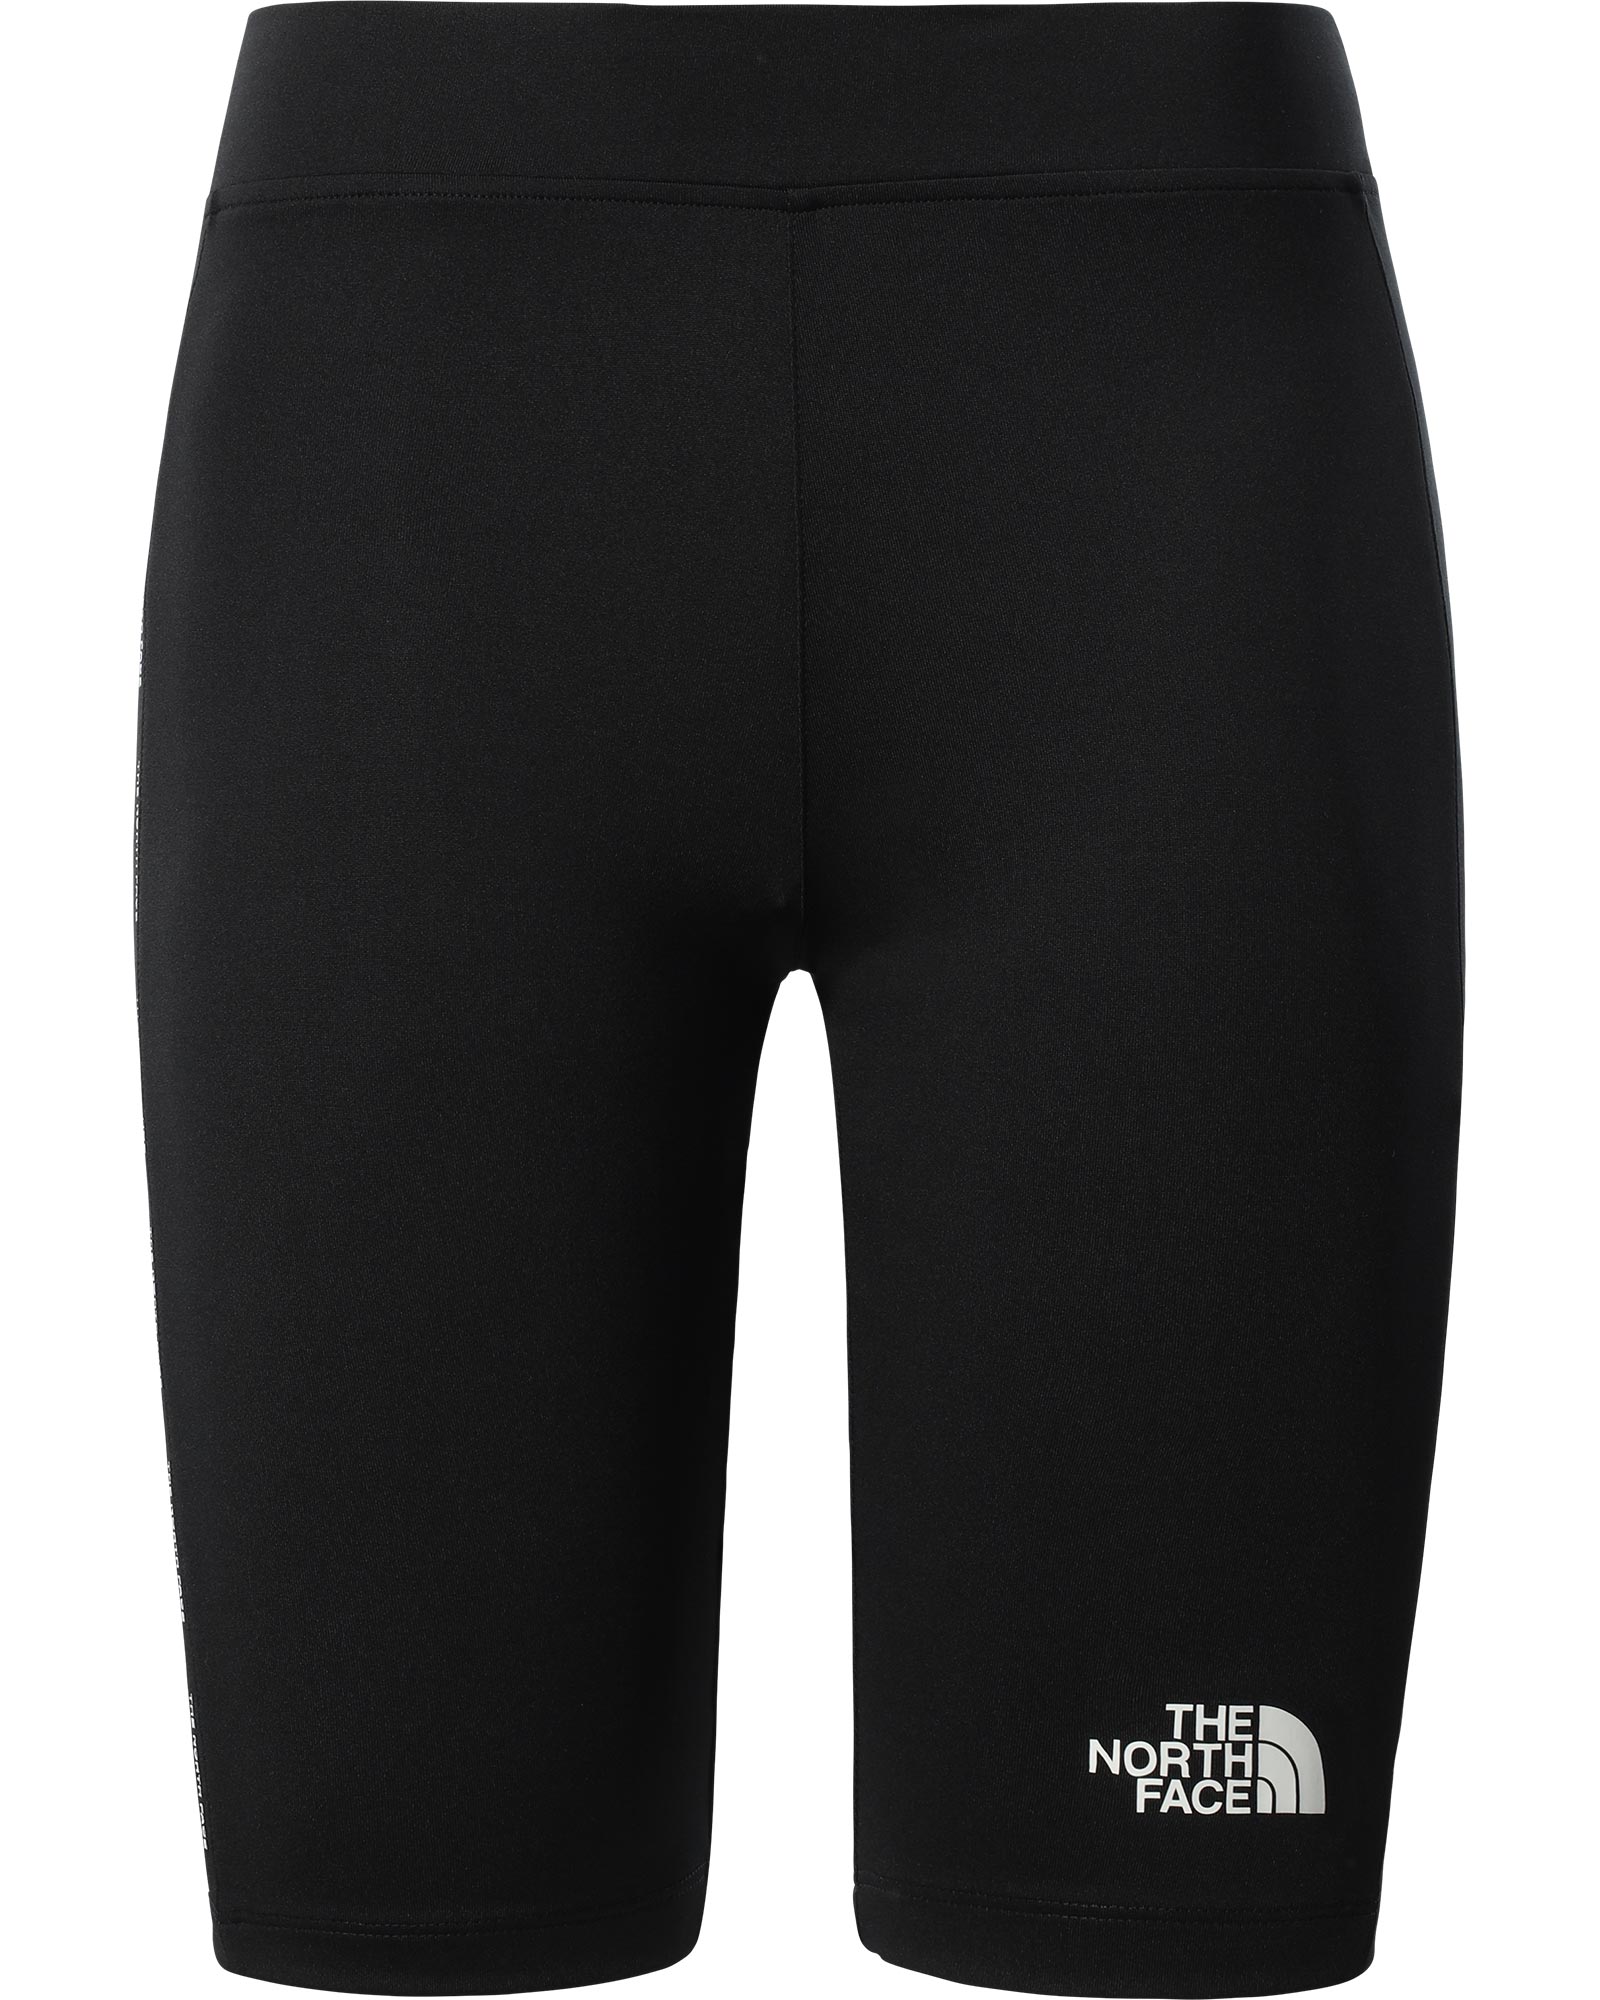 The North Face MA Short Women’s Tights - TNF Black XS